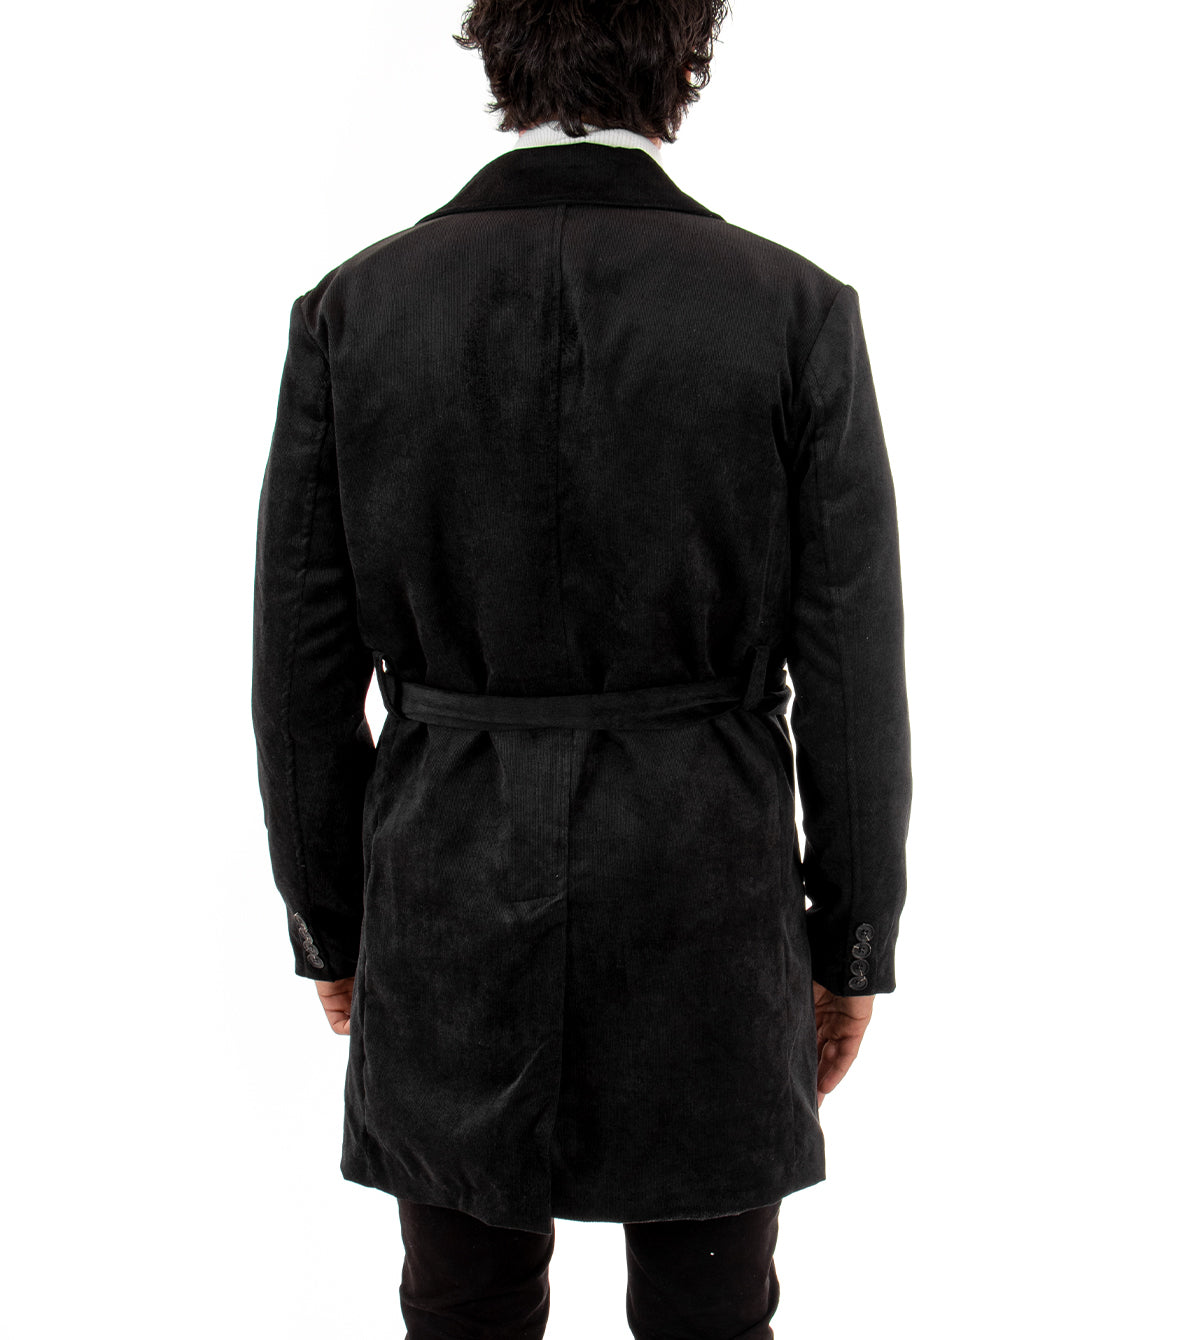 Single-breasted Coat Men's Jacket With Belted Collar Black Elegant Baronet GIOSAL-G2461A